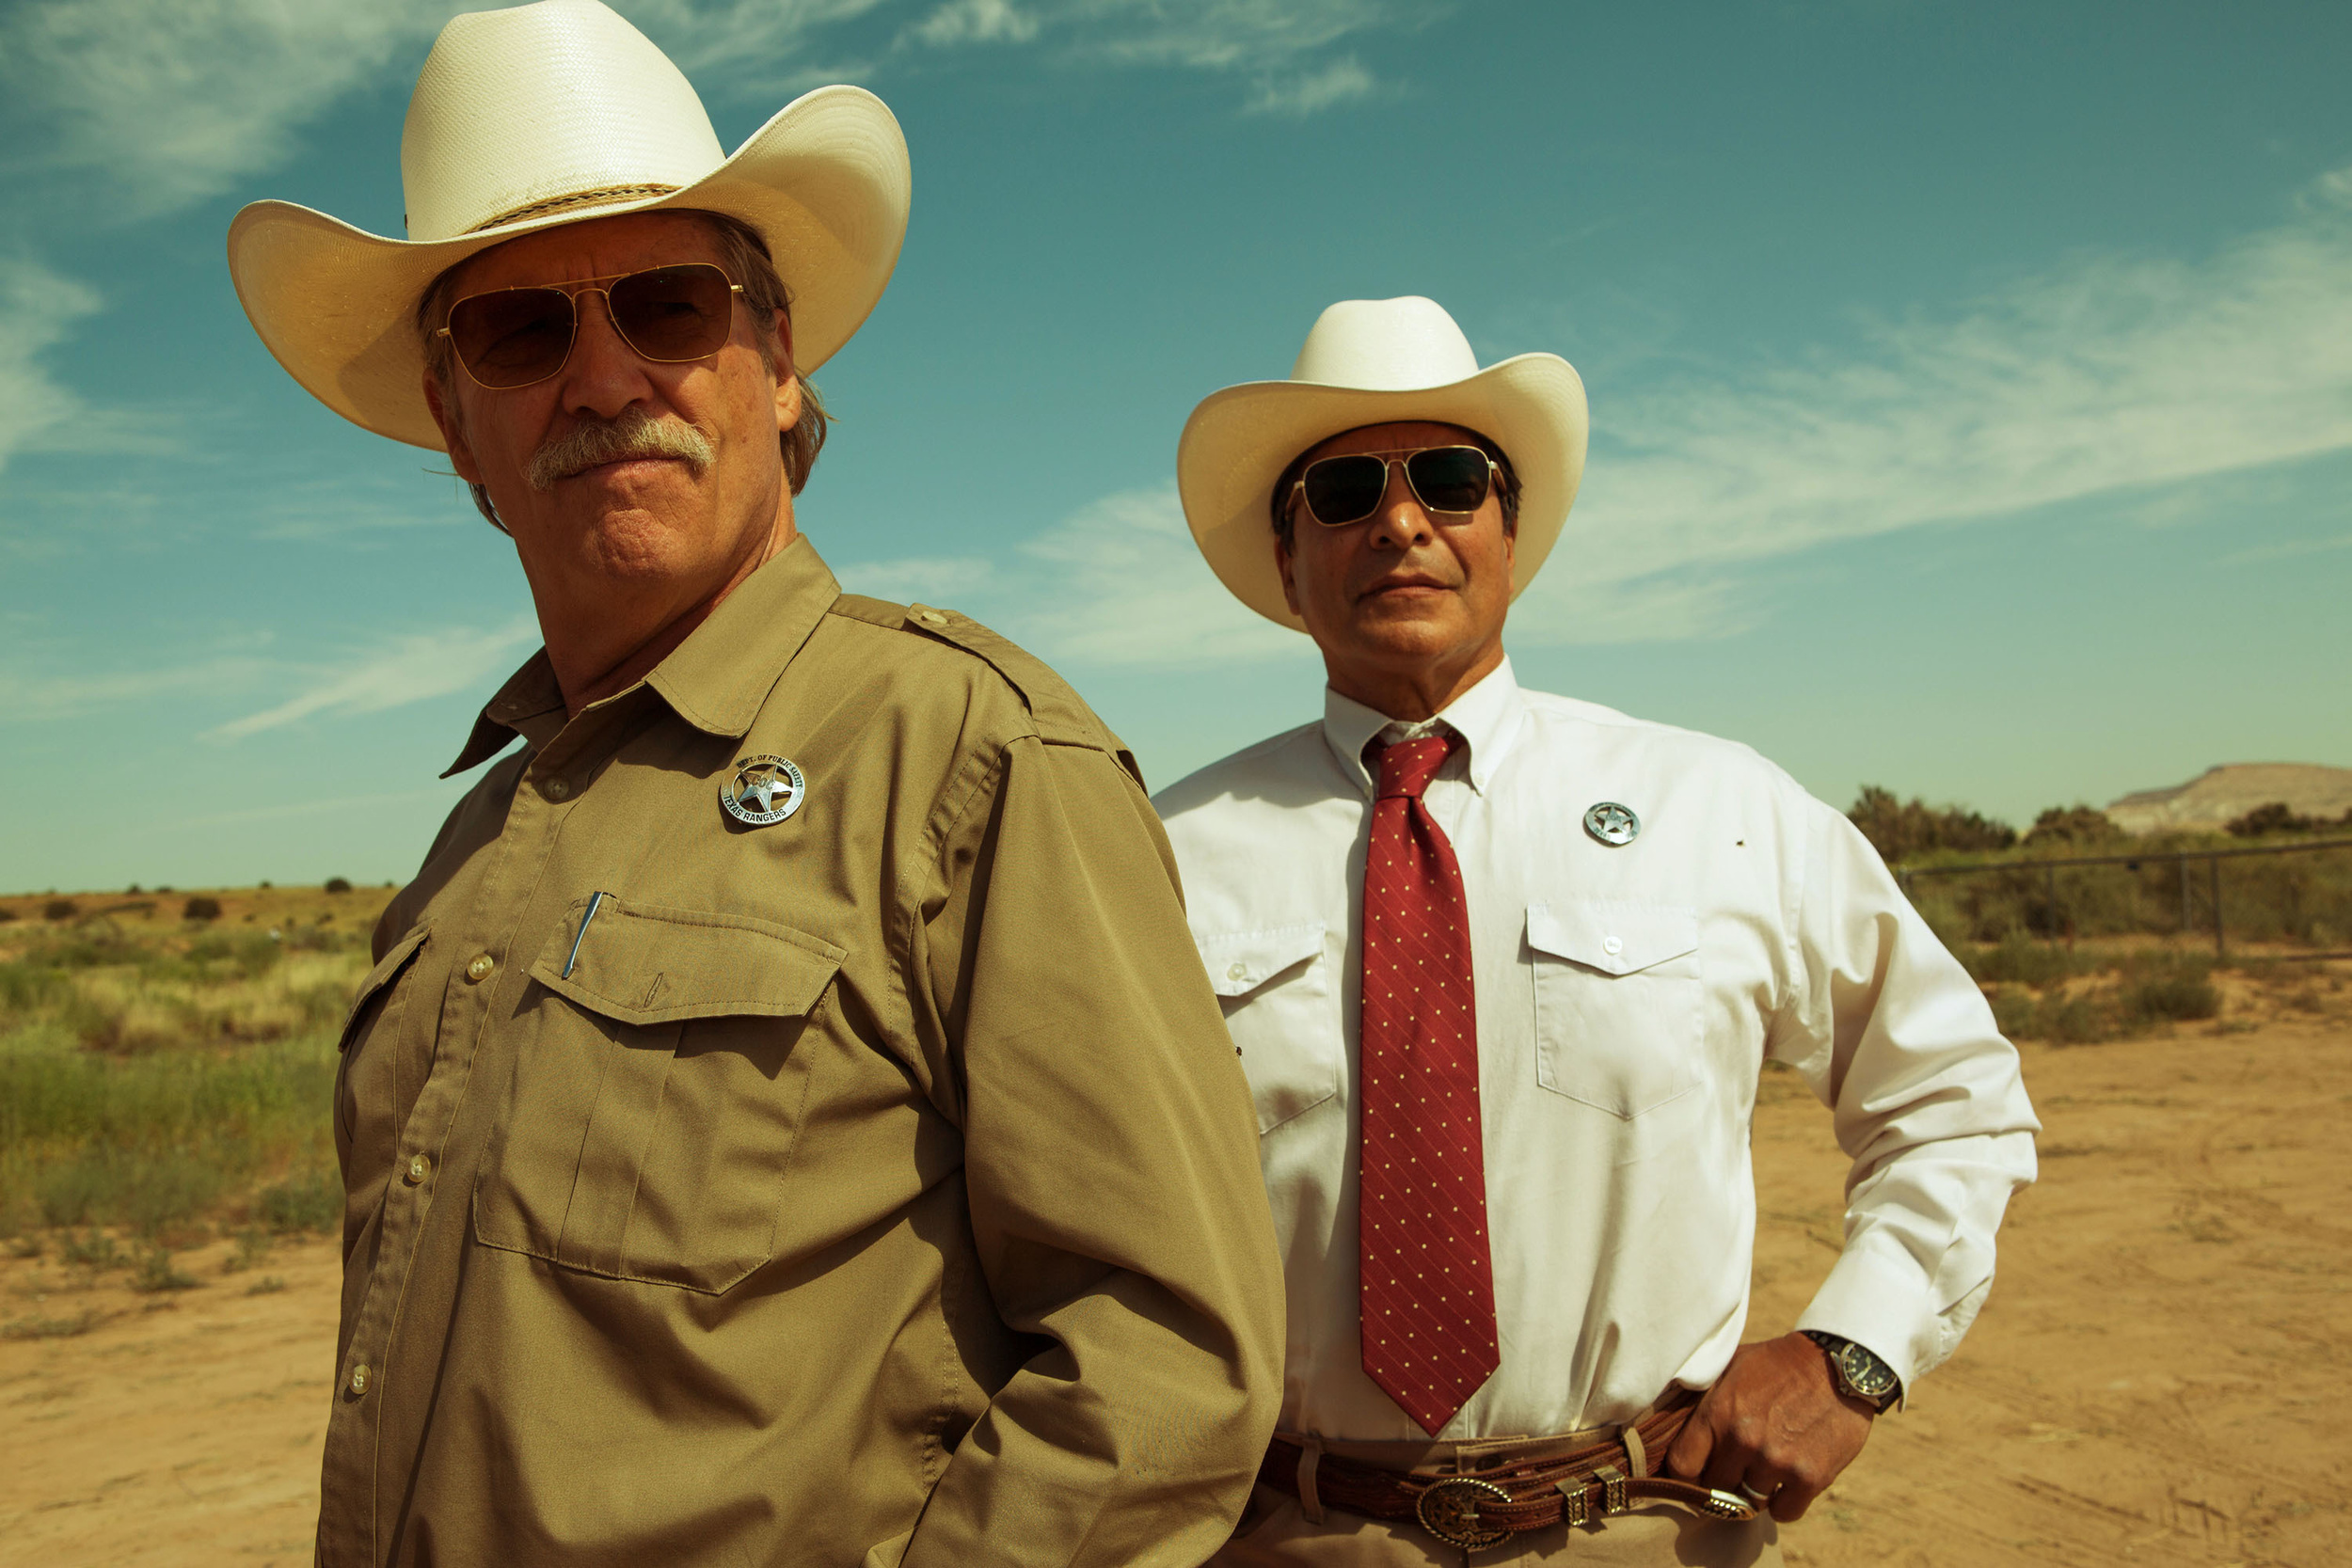 <p>Bridges playing a Texas ranger in a heist drama? Yeah, that’s right up his late-career alley. Fortunately, this time it worked again. This sleek, low-fi drama was a critical darling. <em>Hell or High Water</em> got Bridges another Oscar nomination, his last one as of this writing.</p><p>You may also like: <a href='https://www.yardbarker.com/entertainment/articles/20_critically_acclaimed_films_that_audiences_didnt_like/s1__39404052'>20 critically acclaimed films that audiences didn’t like</a></p>